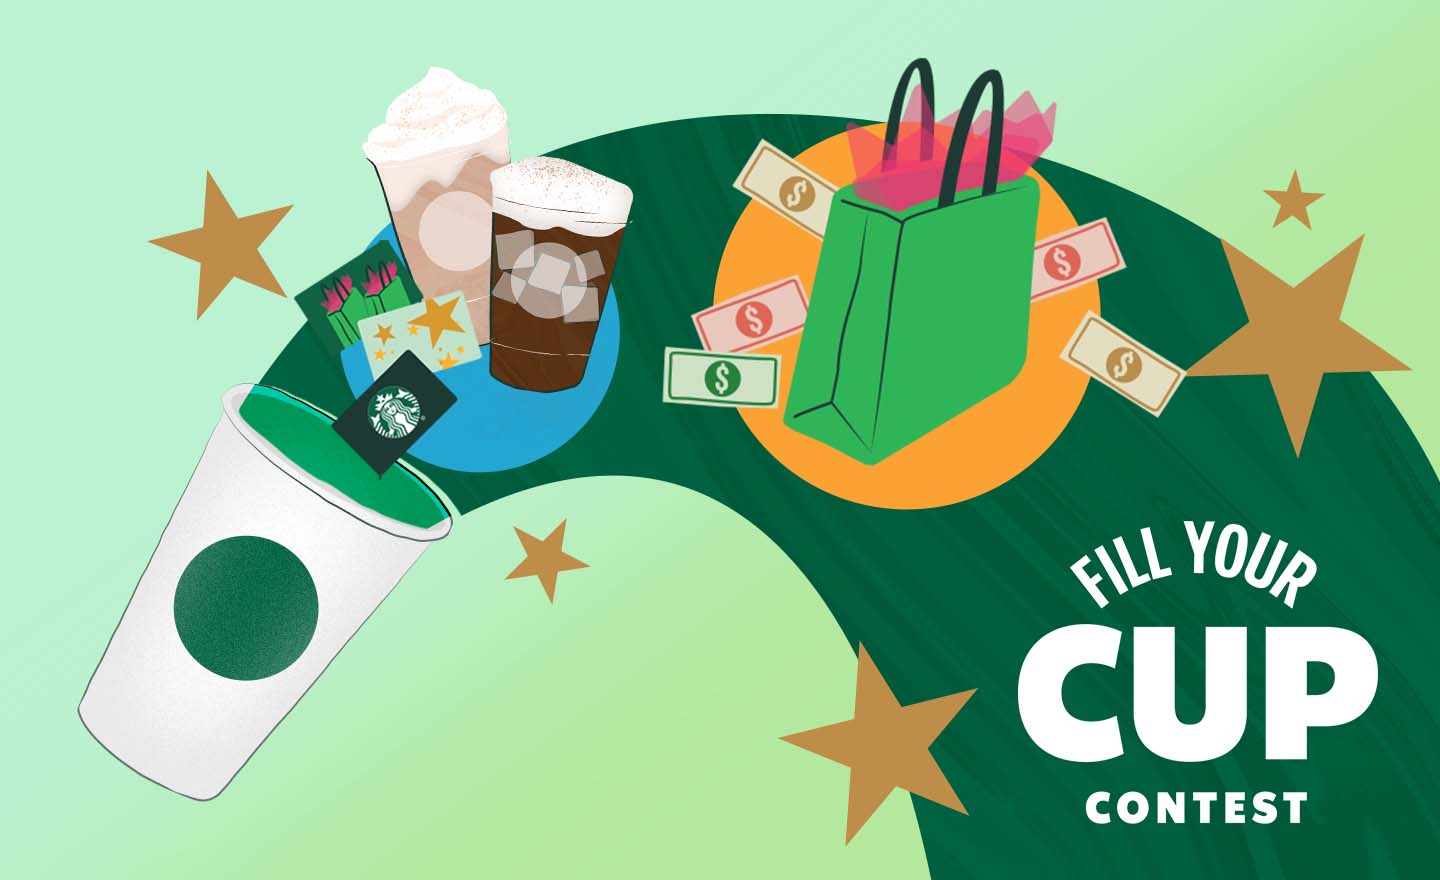 FILL YOUR CUP CONTEST - Starbucks cup and green swirl with money, shopping bag, drinks and stars coming out